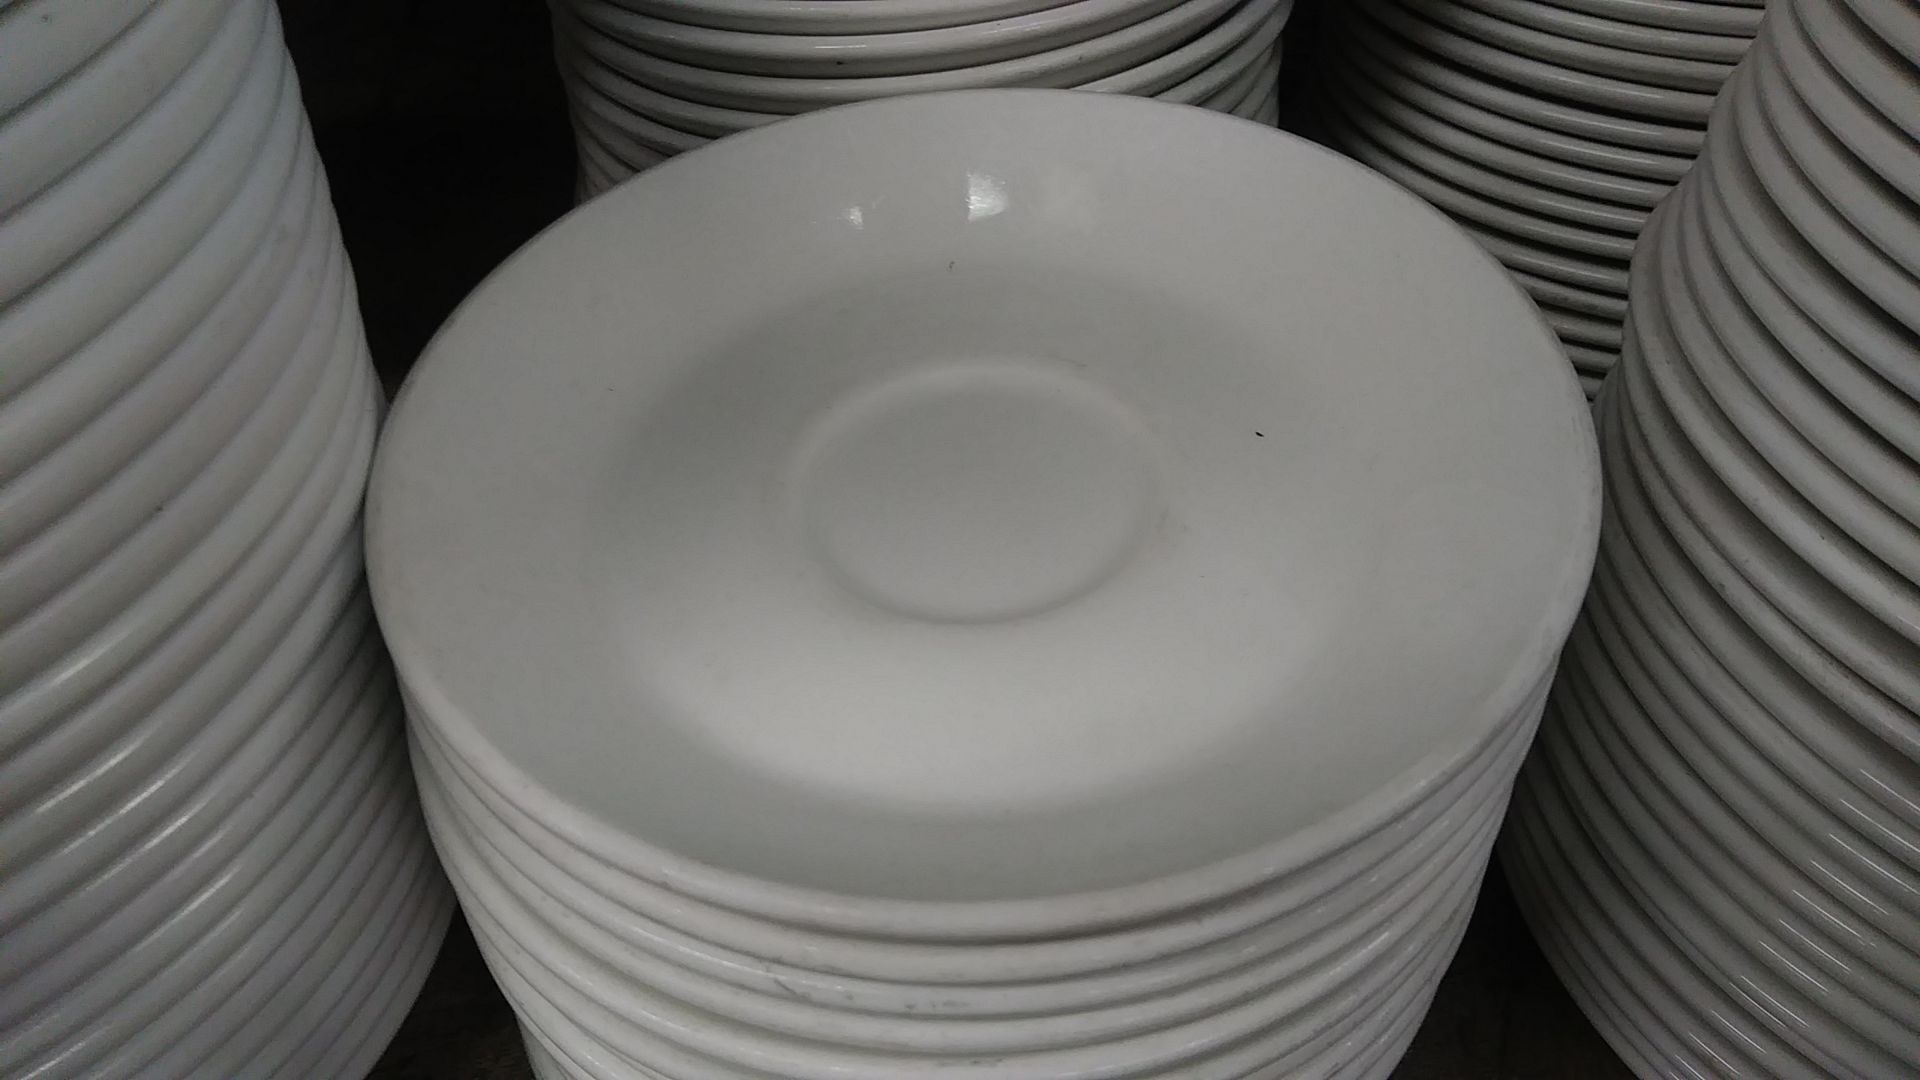 6" STEELITE SAUCER (includes QTY 35 in this lot)